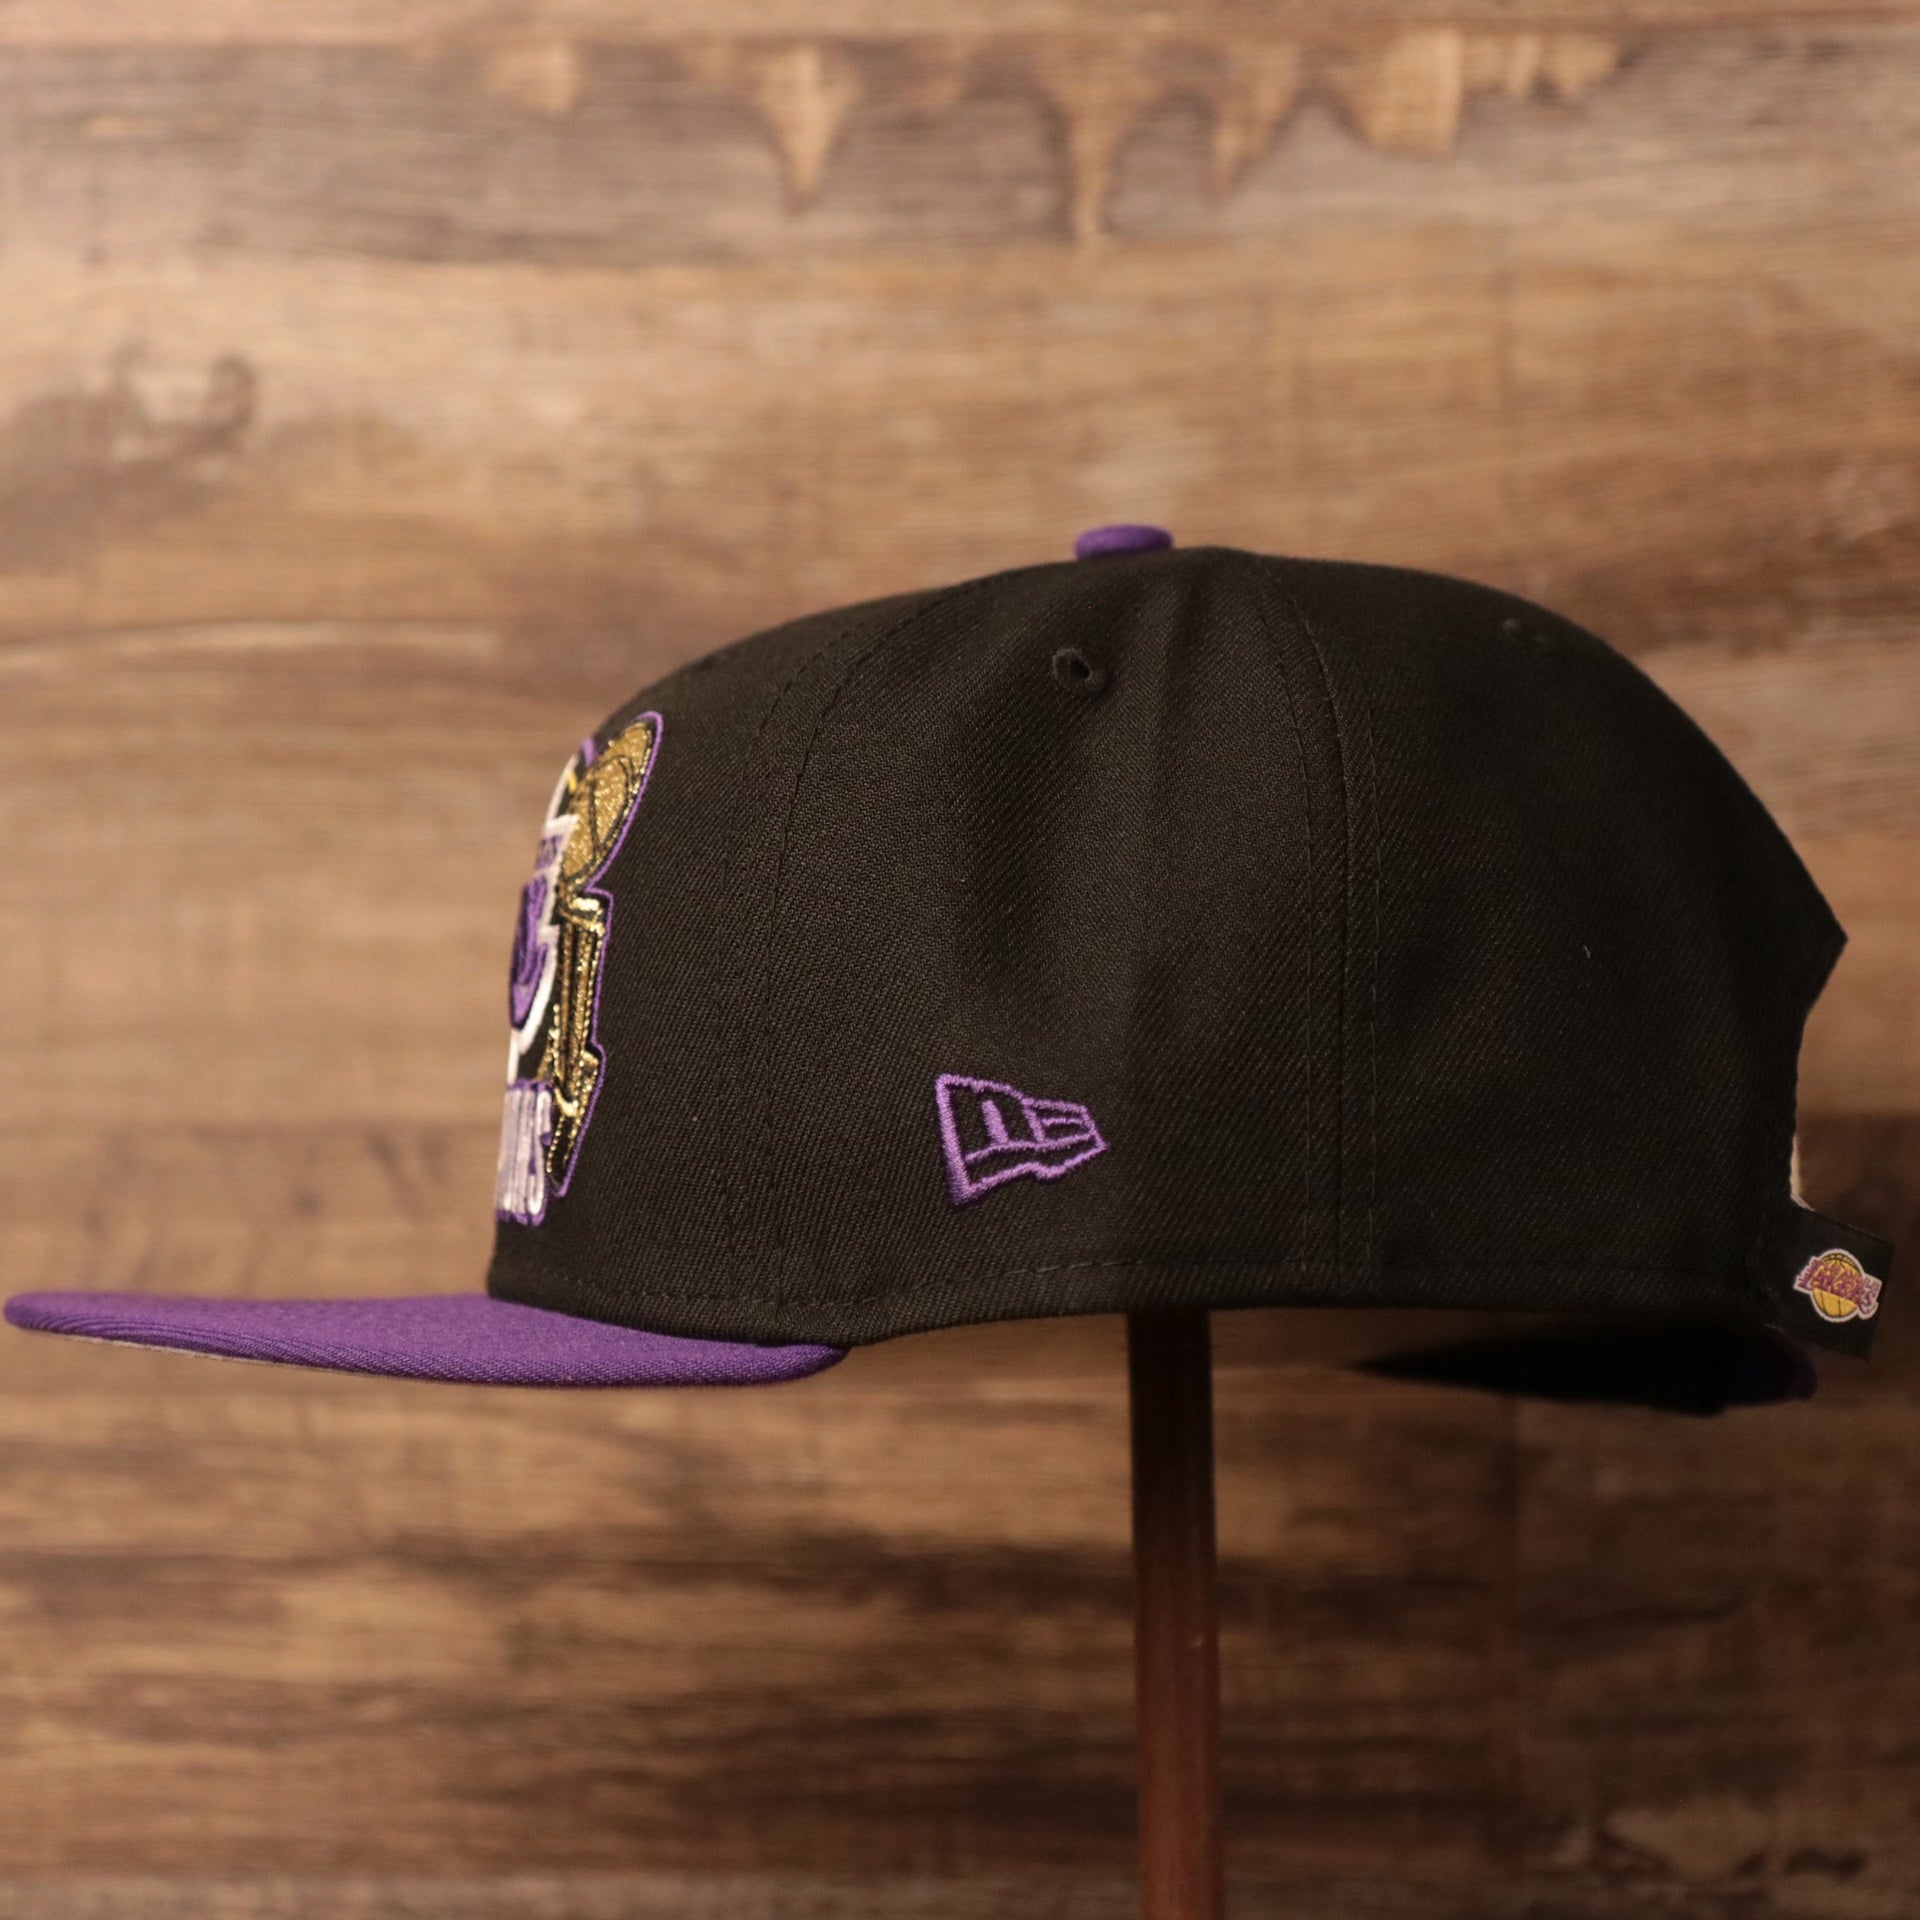 The left side of the black/purple Lakers championship hat 2020.